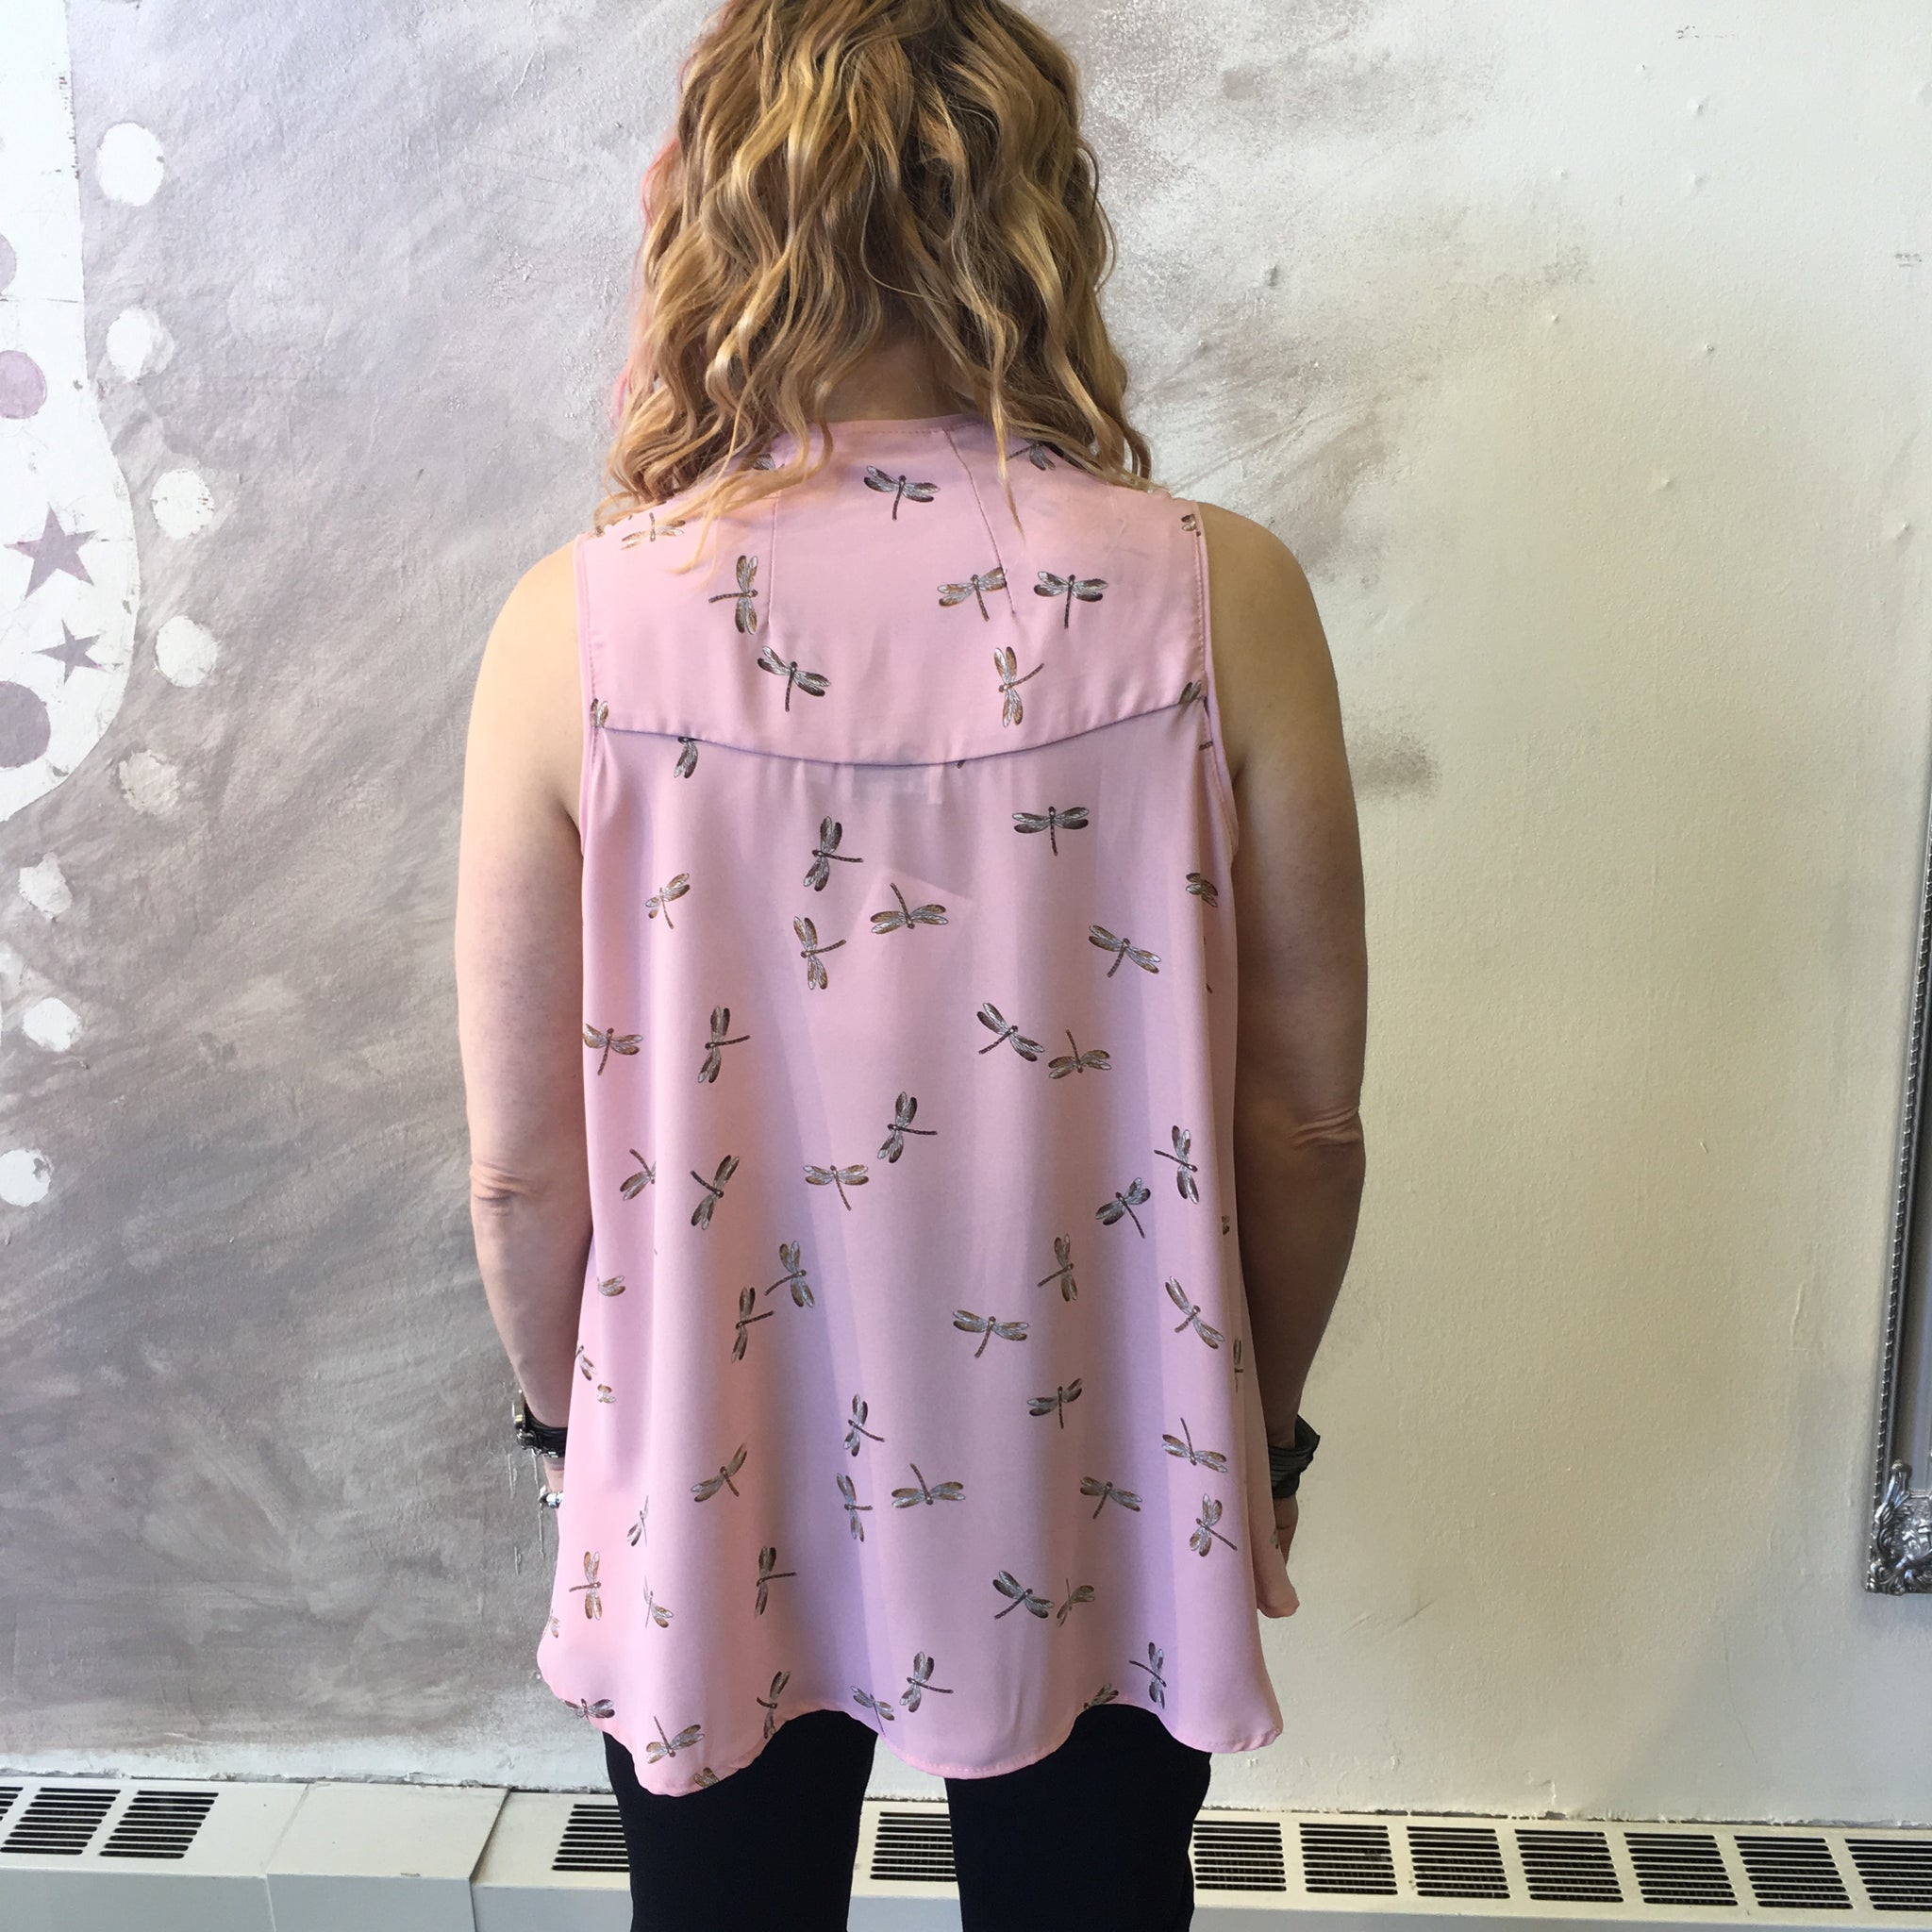 Model shows pink dragonfly print Empress top from behind in size small and is 5'5" tall